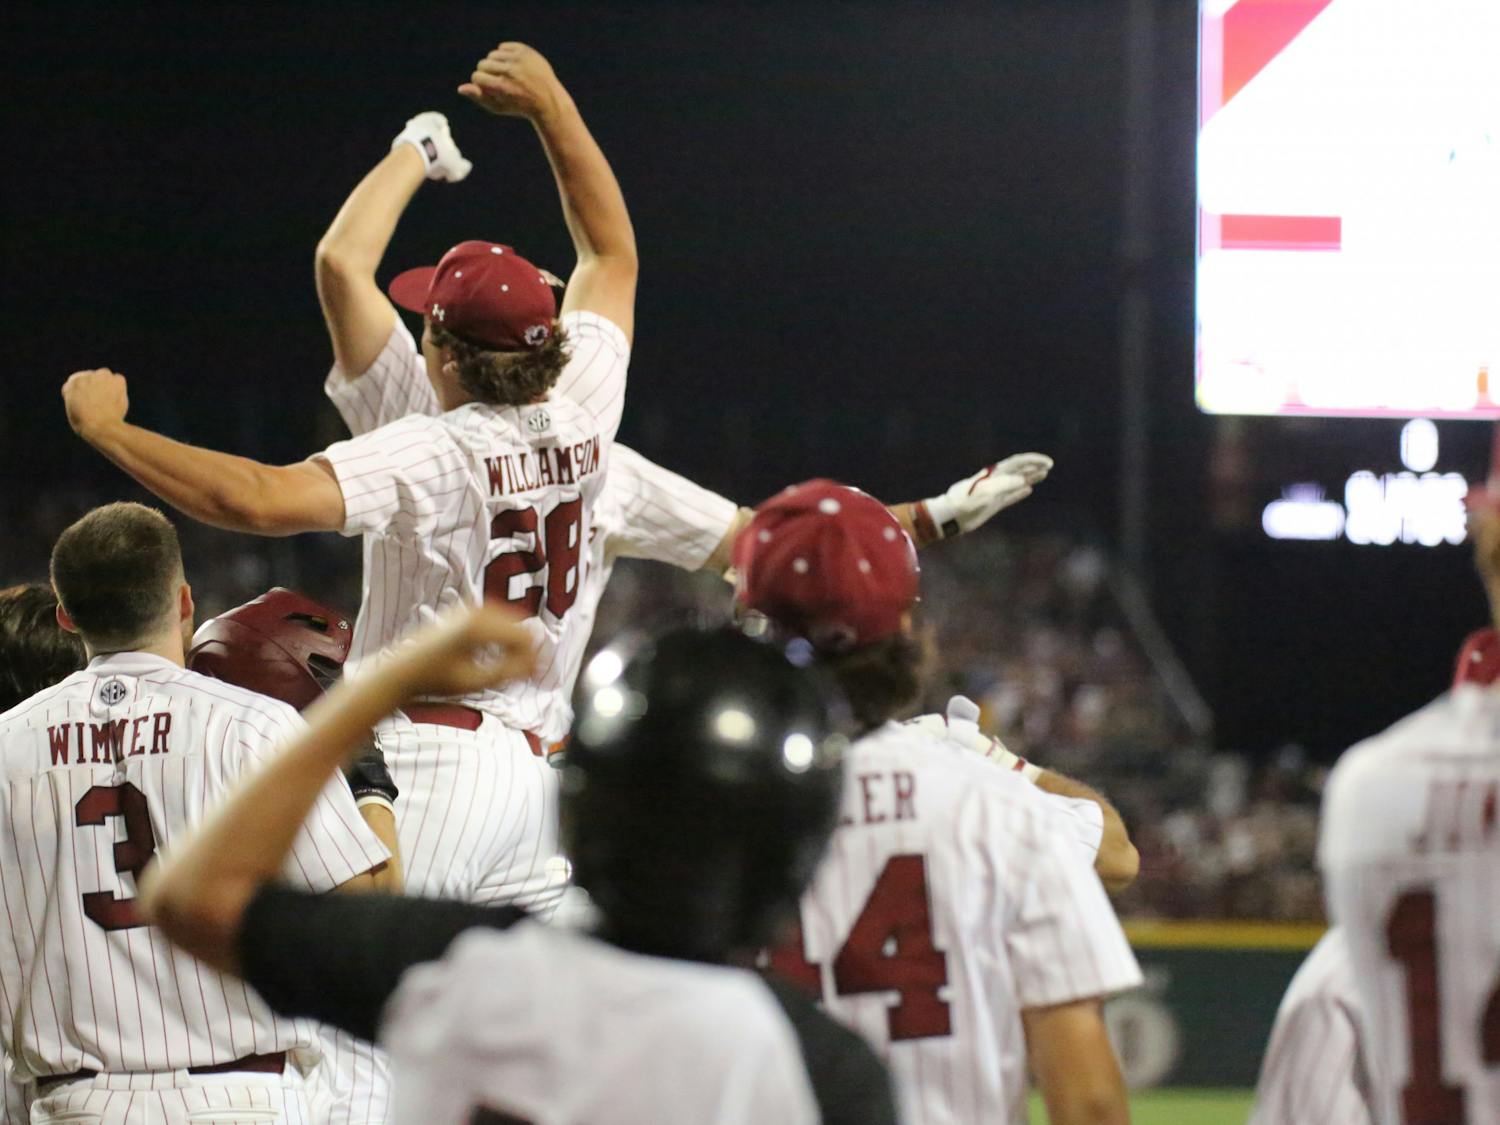 Freshman pitcher Austin Williamson congratulates freshman outfielder Ethan Petry on his 384-foot grand slam by jumping with excitement after he crosses home plate. Petry’s two home runs and eight RBI during the first game of the two-game series against LSU helped South Carolina win 13-5.